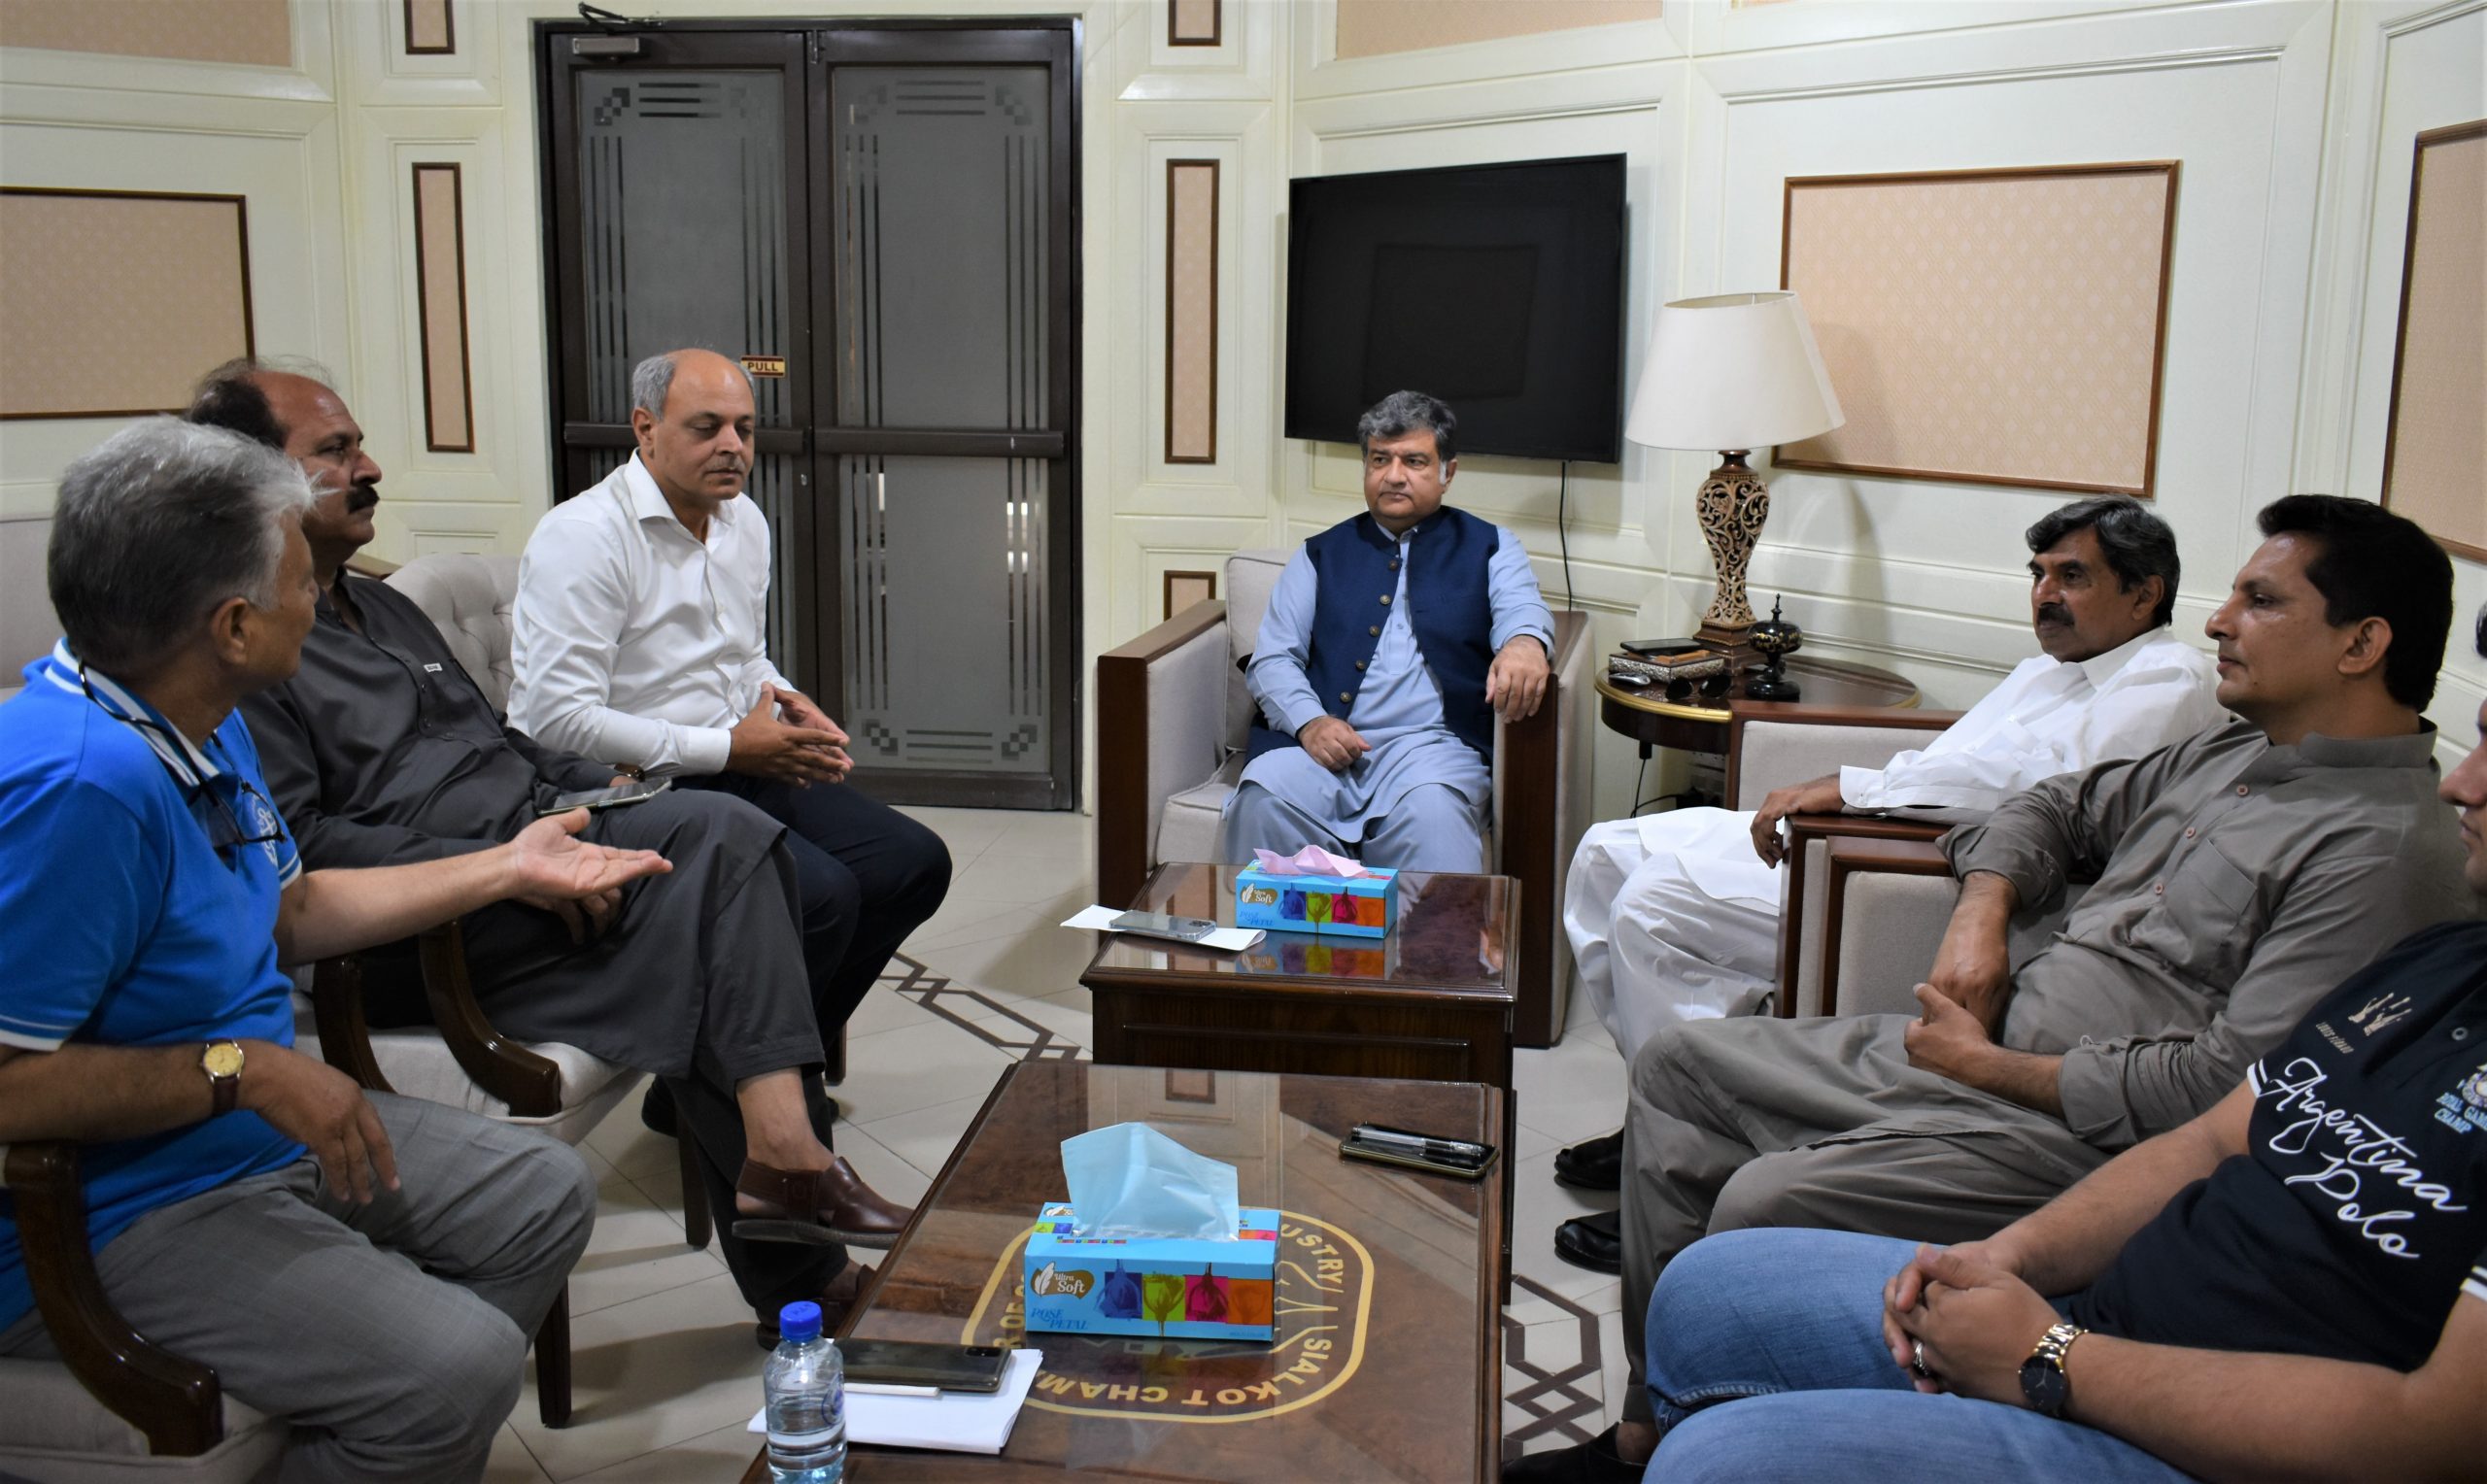 Mian Imran Akbar, President, The Sialkot Chamber of Commerce & Industry had a meeting with Mr. Niaz Khan, Director, Punjab Employees Social Security Institution (PESSI) on April 12, 2022. Wherein, the matters related to the collection of social security contributions were discussed. Mr. Muhammad Ayub Khan and Ch. Jahangir Rashid also attended the meeting.